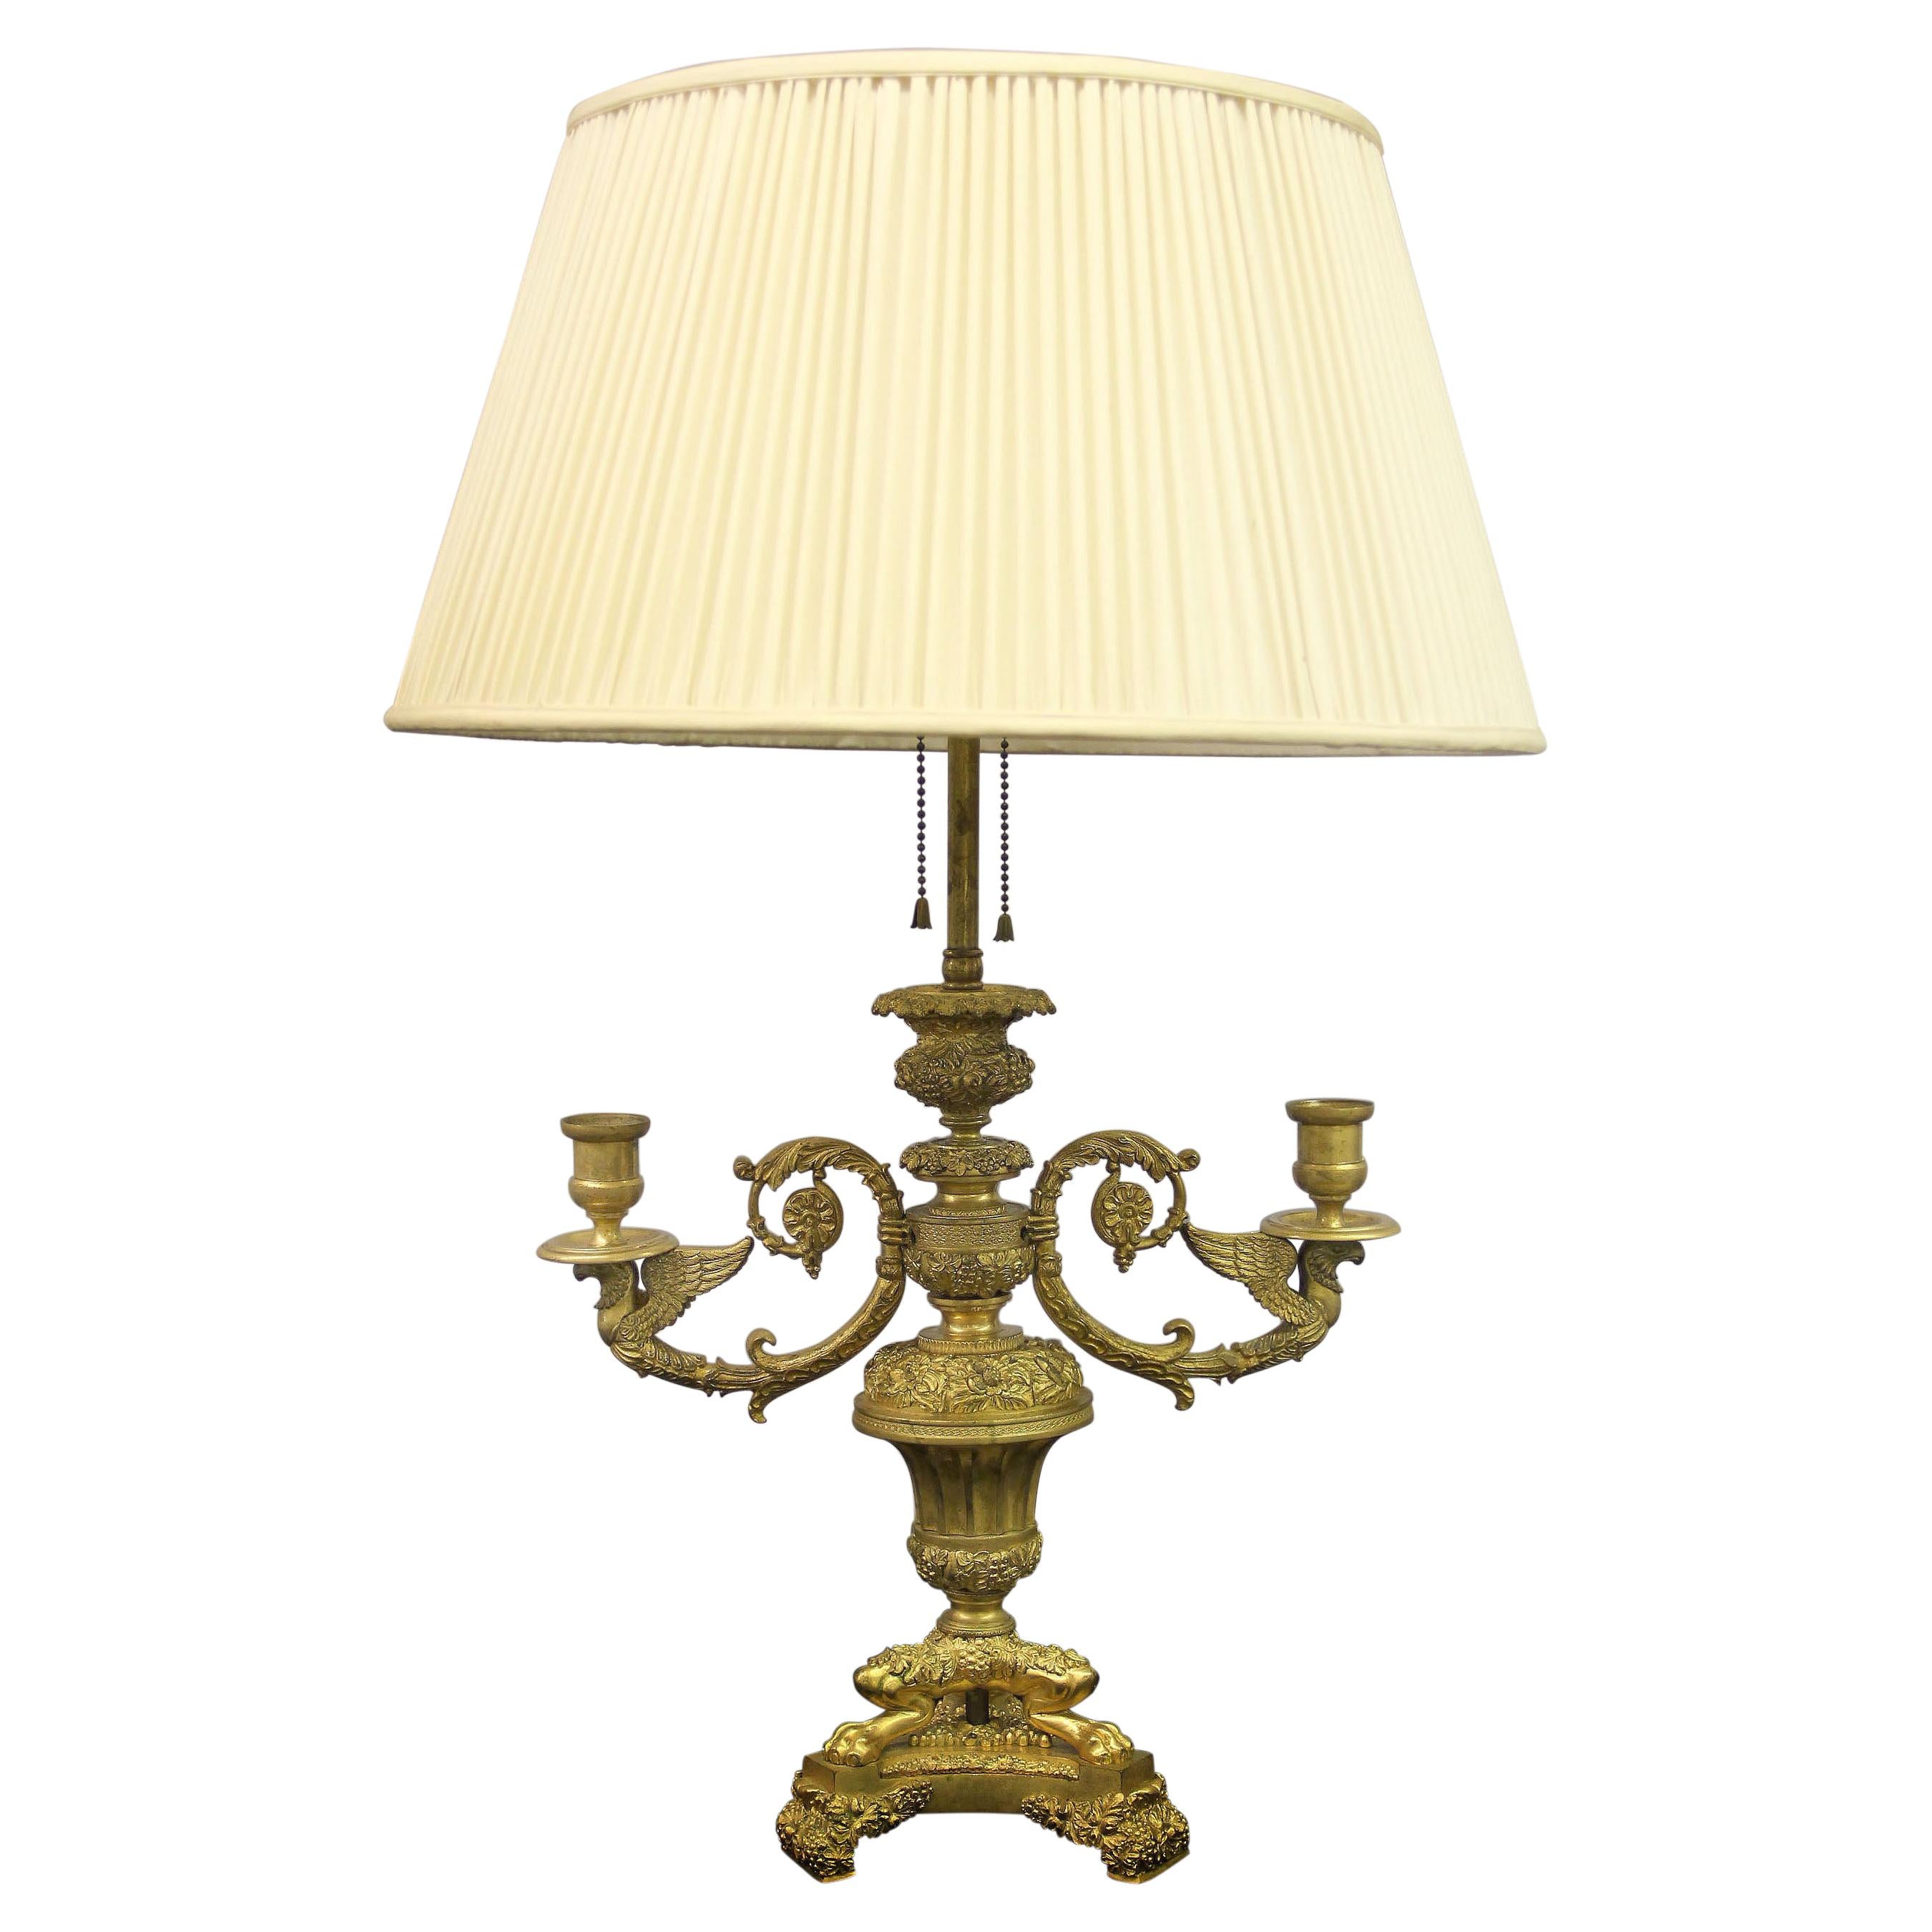 Beautiful Late 19th Century Empire Style Gilt Bronze Lamp For Sale